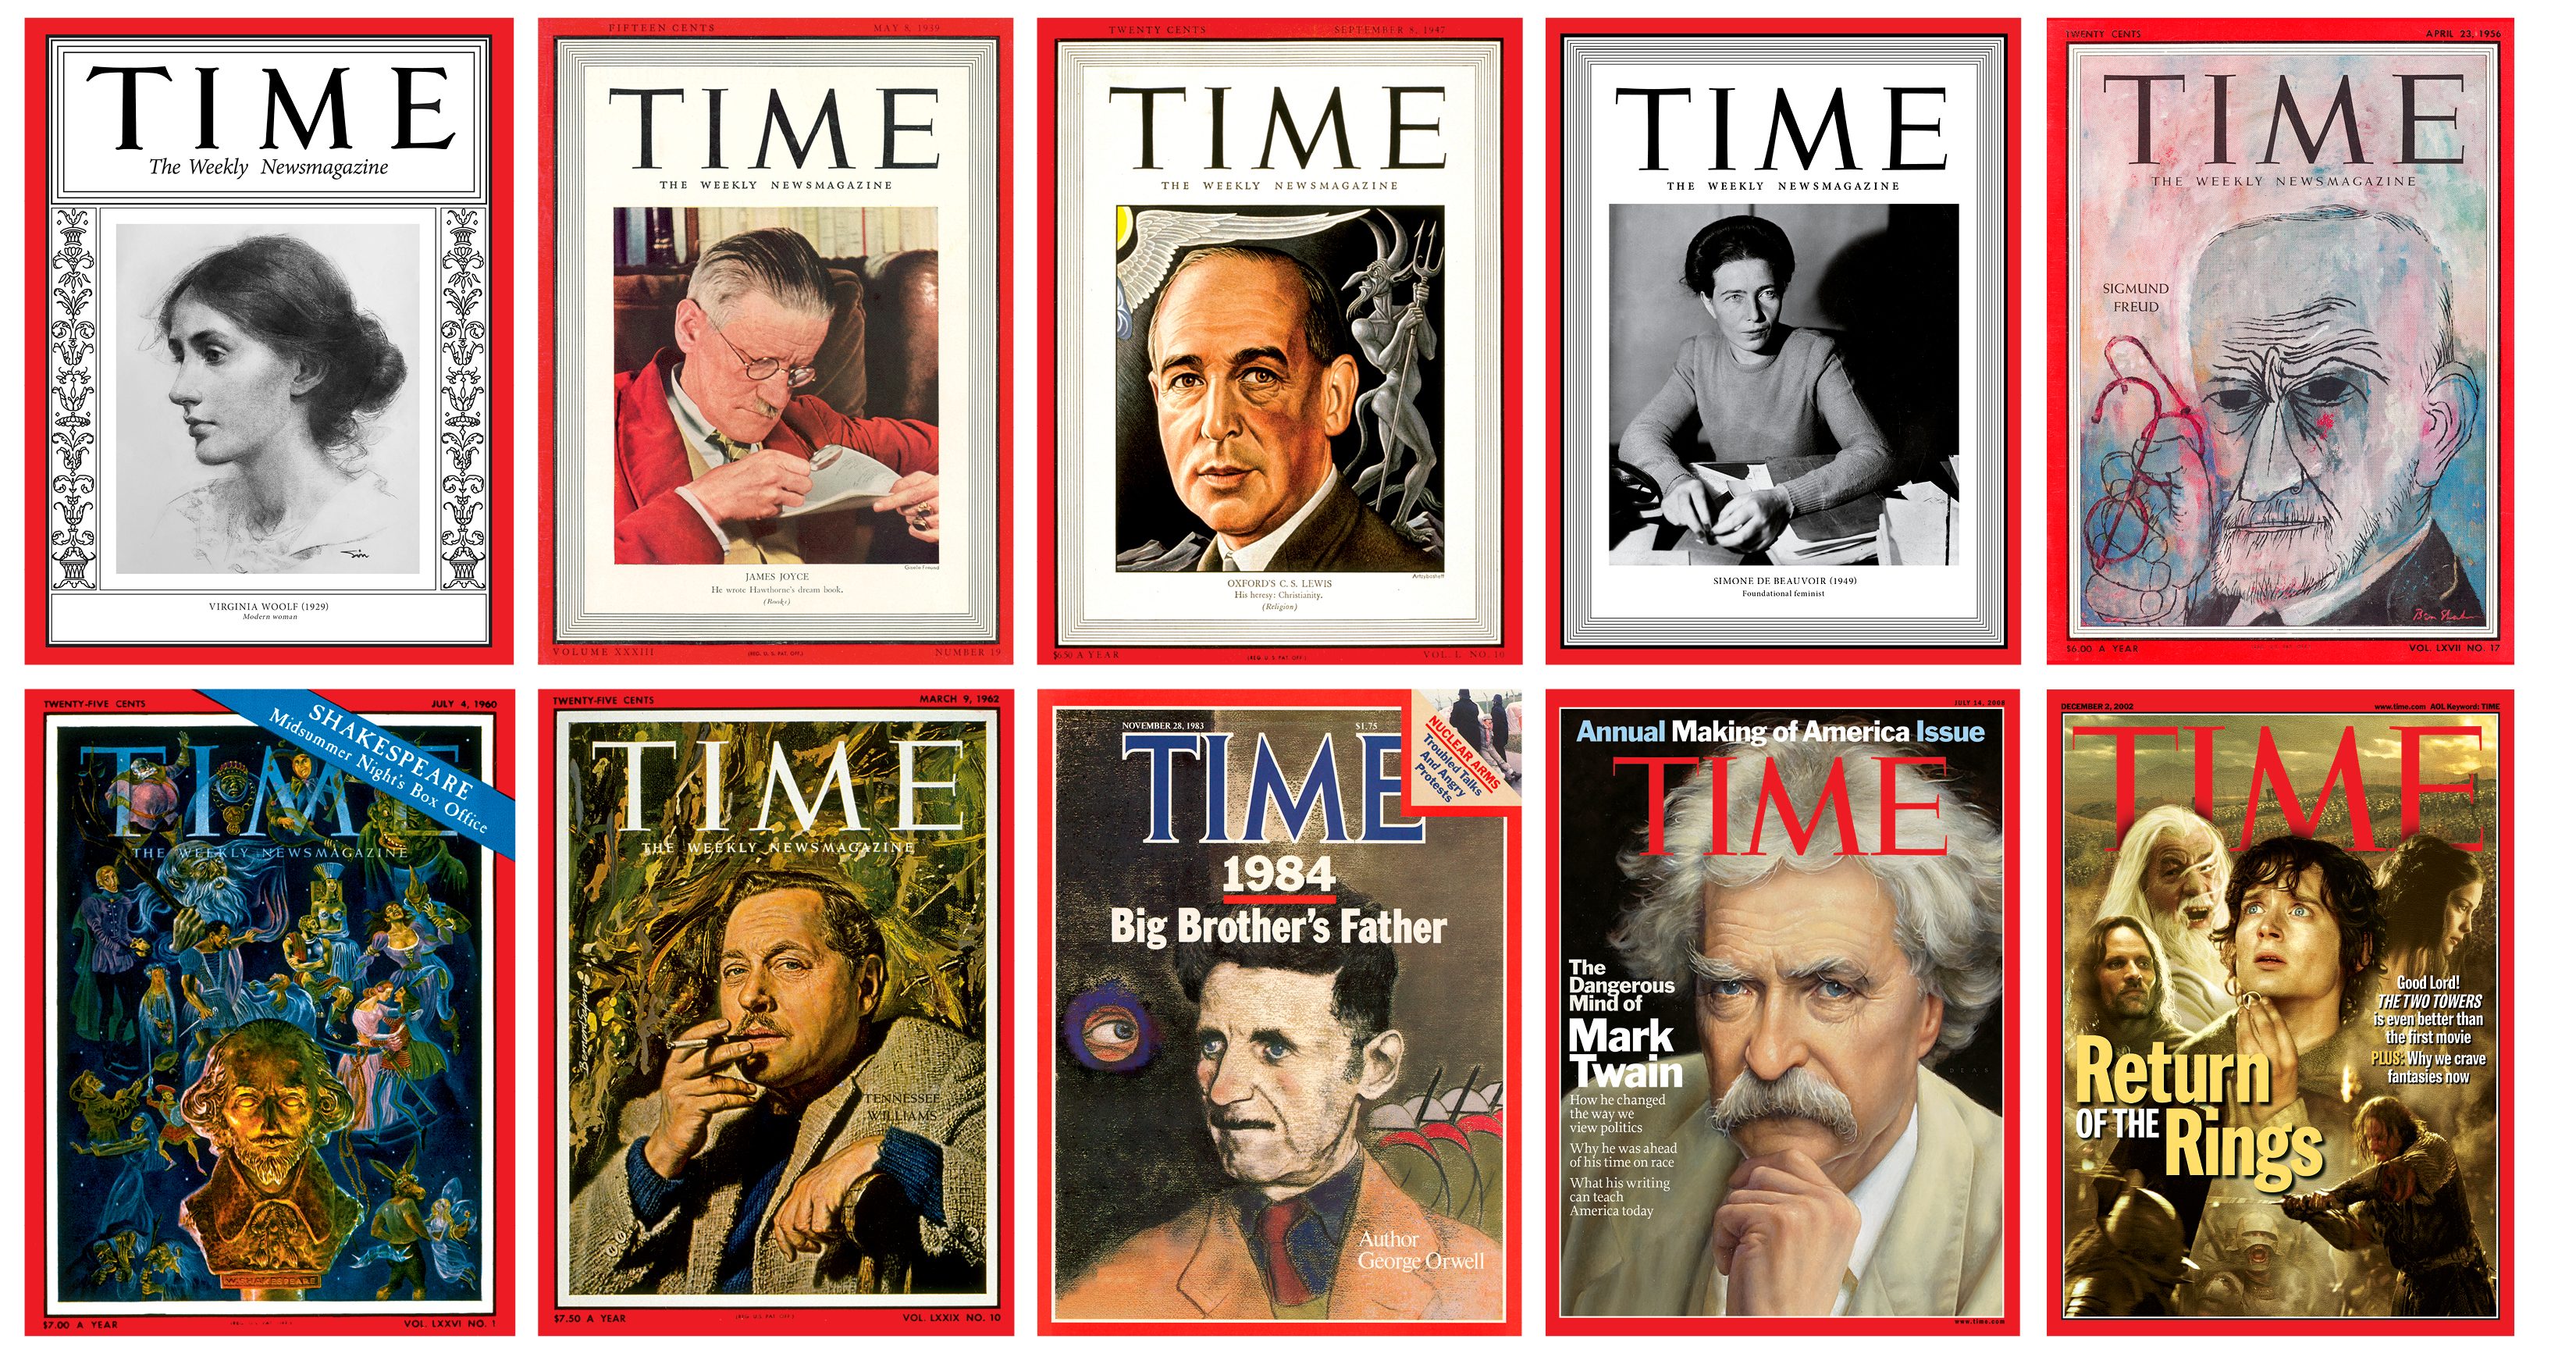 Writers on the cover of TIME who "could have" won the Nobel Prize in Literature, as selected by Livraria Lello